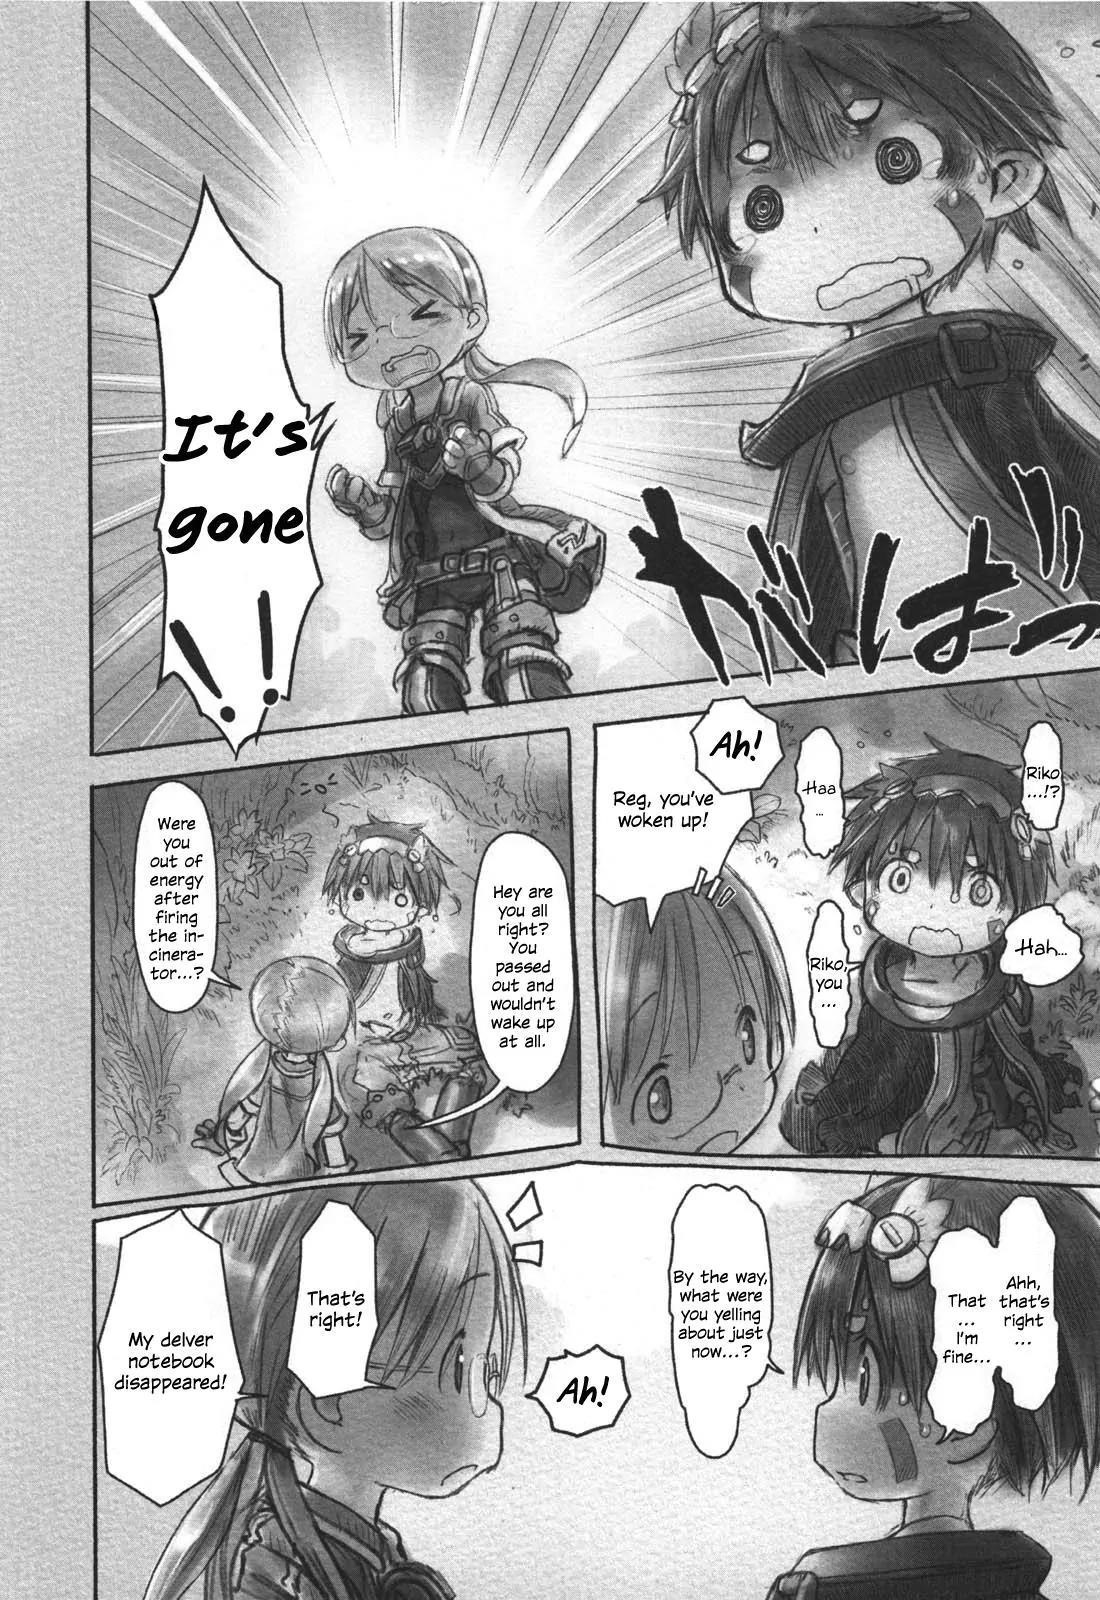 Made In Abyss - Chapter 12 - Made in Abyss Manga Online